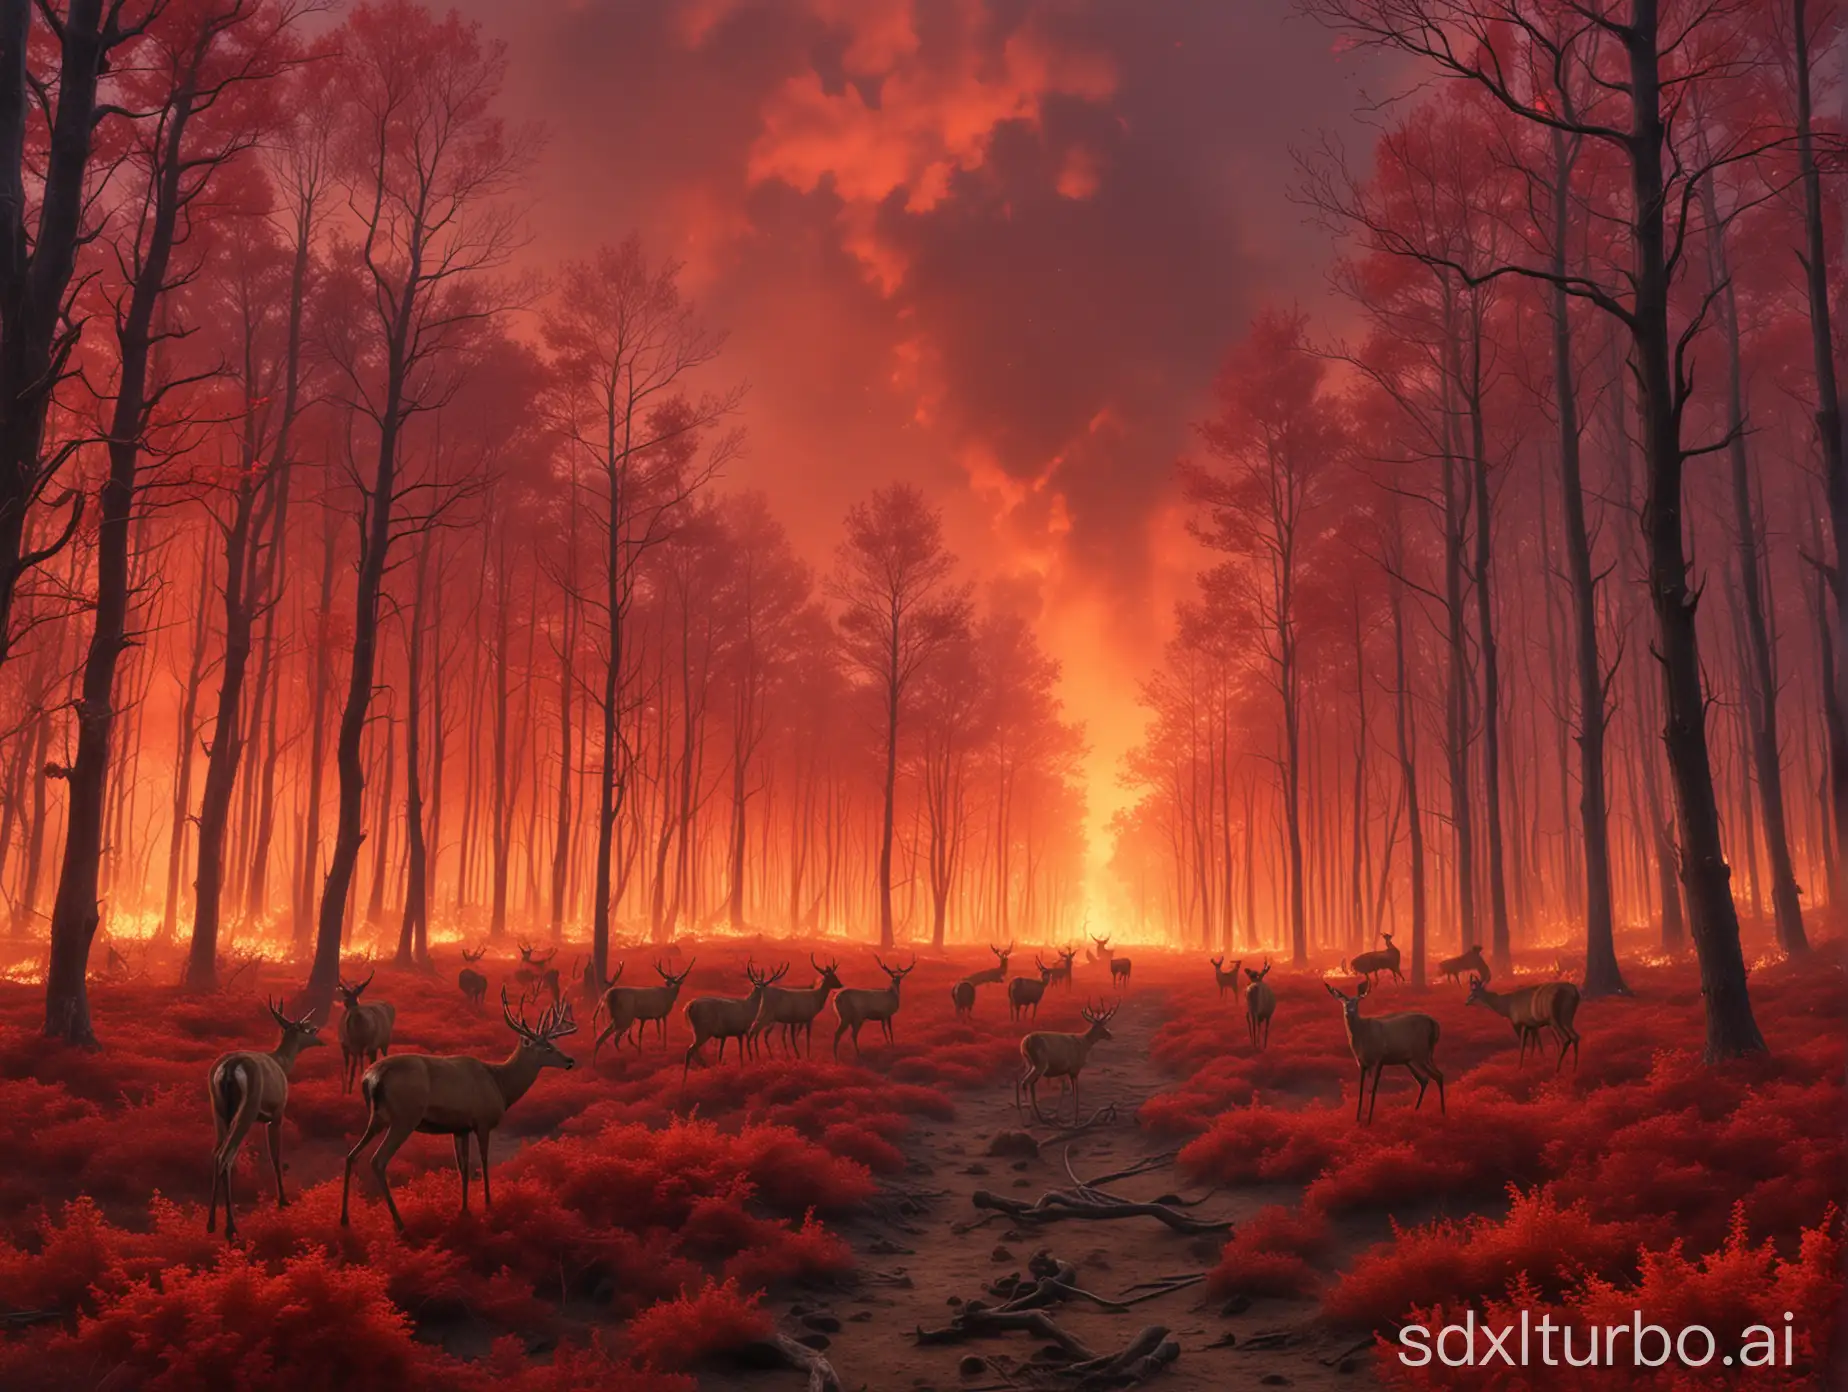 a forest on fire, a sky of crimson, a group of deer fleeing from the forest